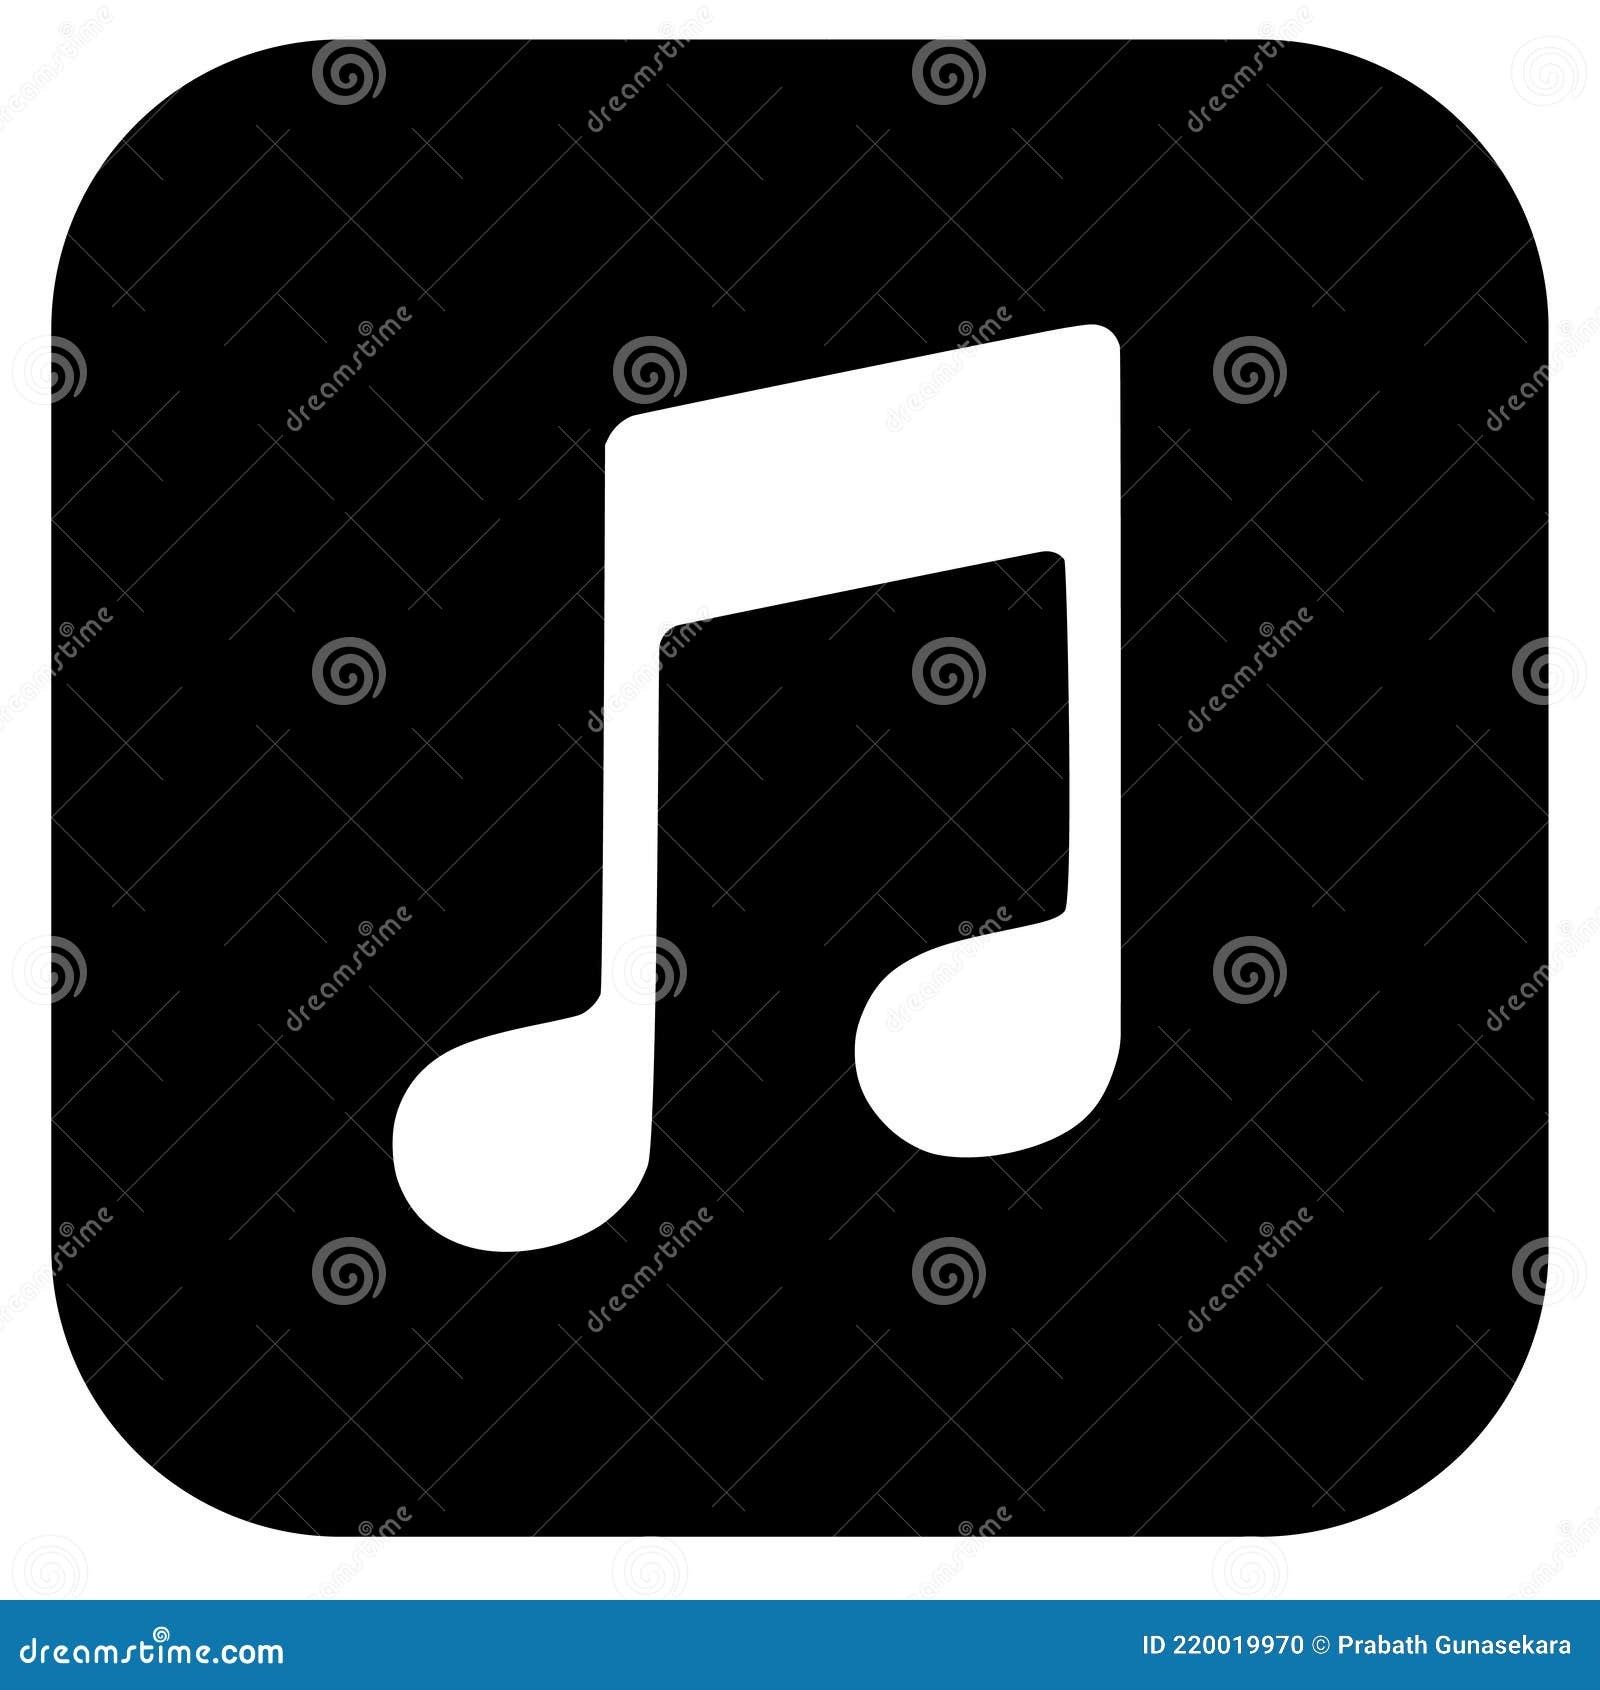 black and white music icon   on white background